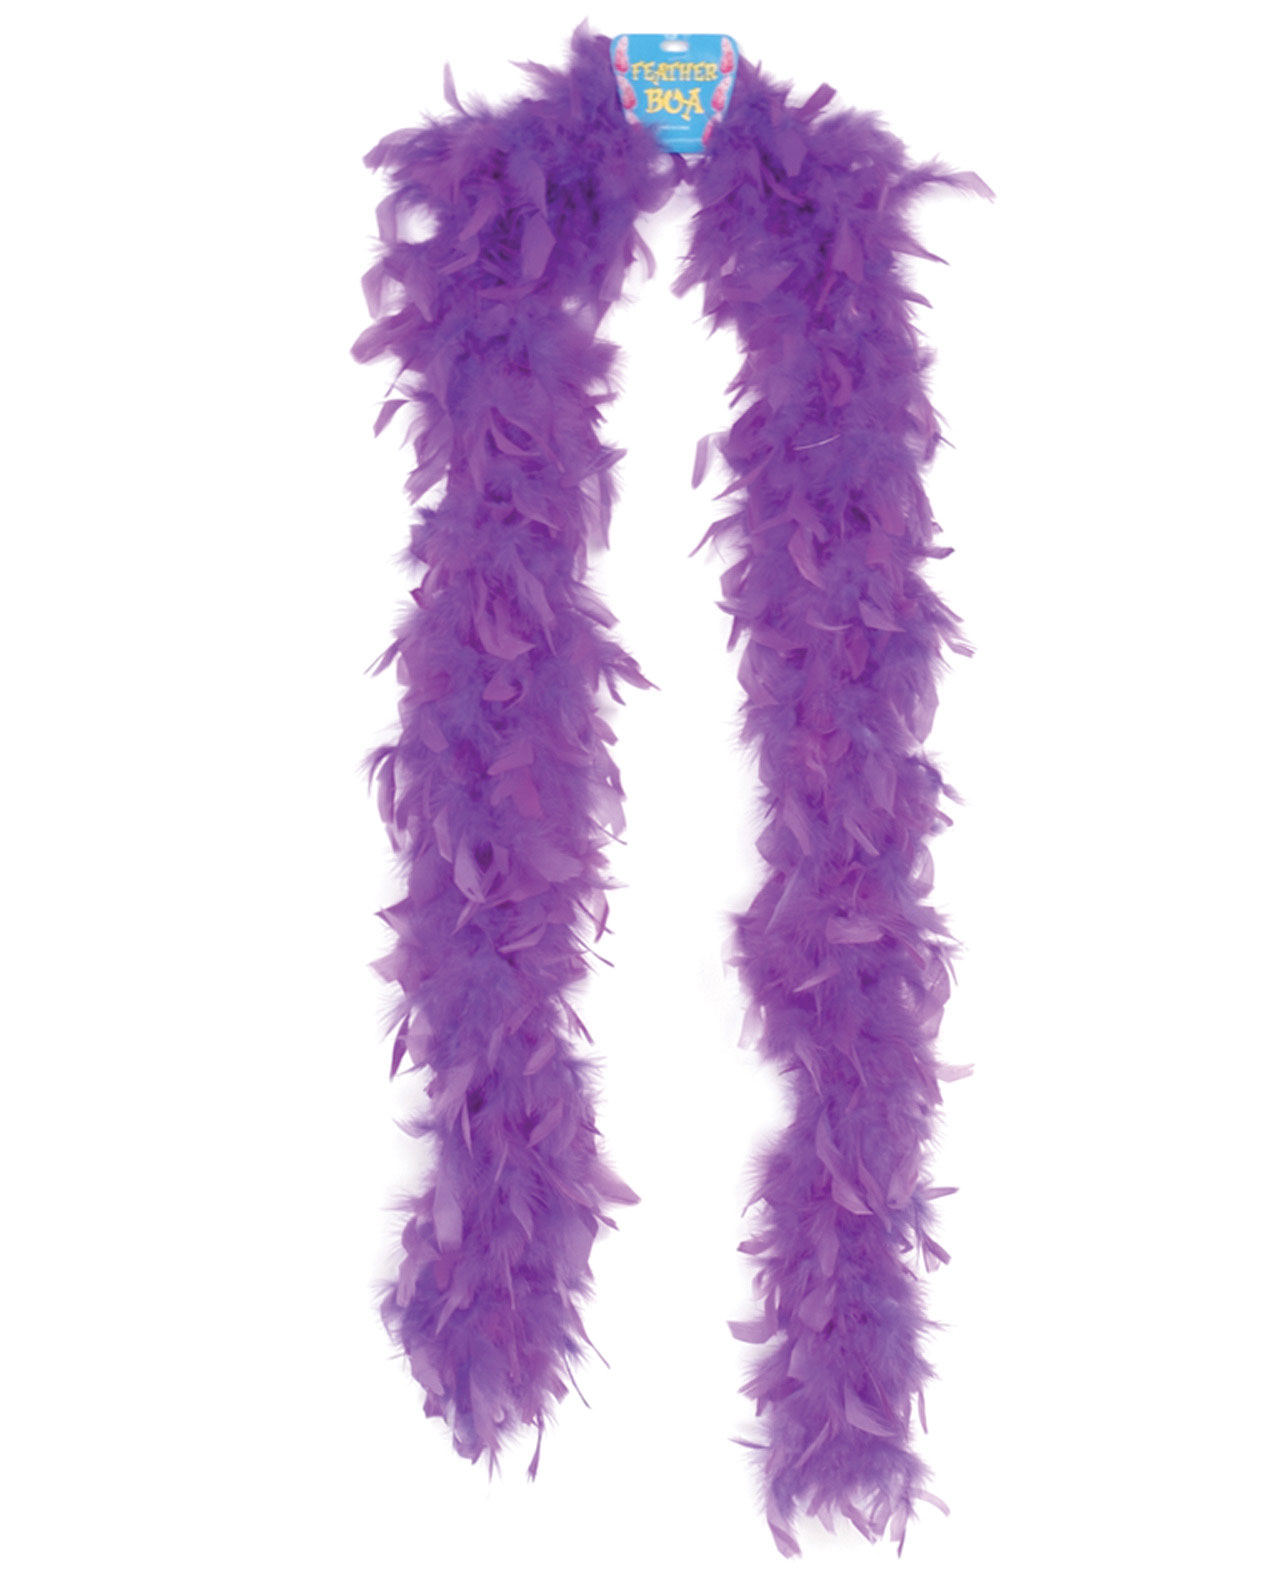 Zucker feather products Men's Light weight feather boa - purple - One Size for Mardi Gras